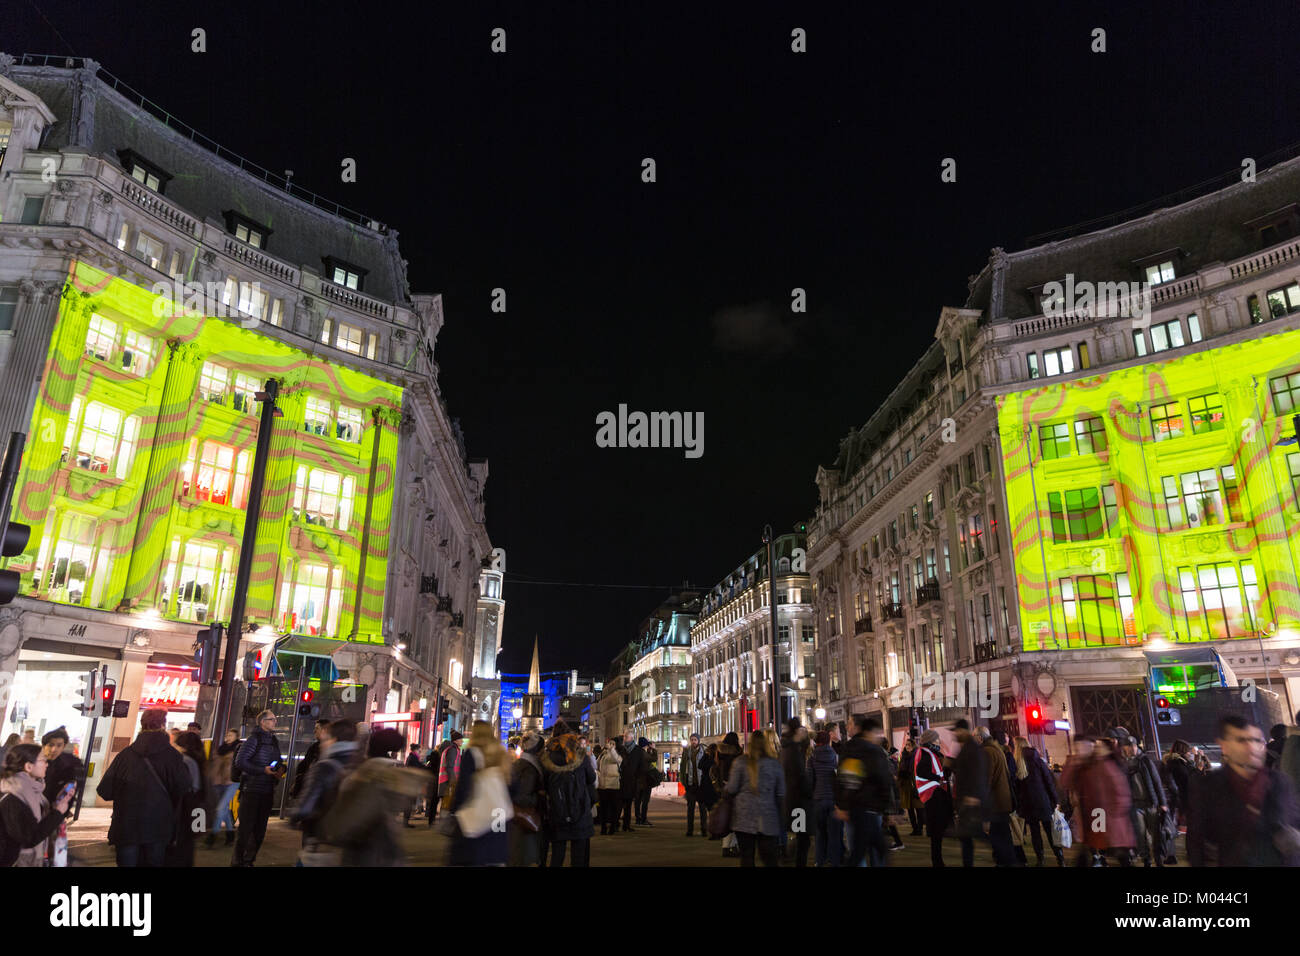 London, UK. 18th Jan 2018. Lumiere London 2018 Lights festival.  Oxford Circus and parts of Regent Street are closed to traffic as people view the colourful images projected  onto buildings on Oxford Circus. Lumiere London is a light festival that presents an array of public art work and light installations across the capital. Credit: Imageplotter News and Sports/Alamy Live News Stock Photo